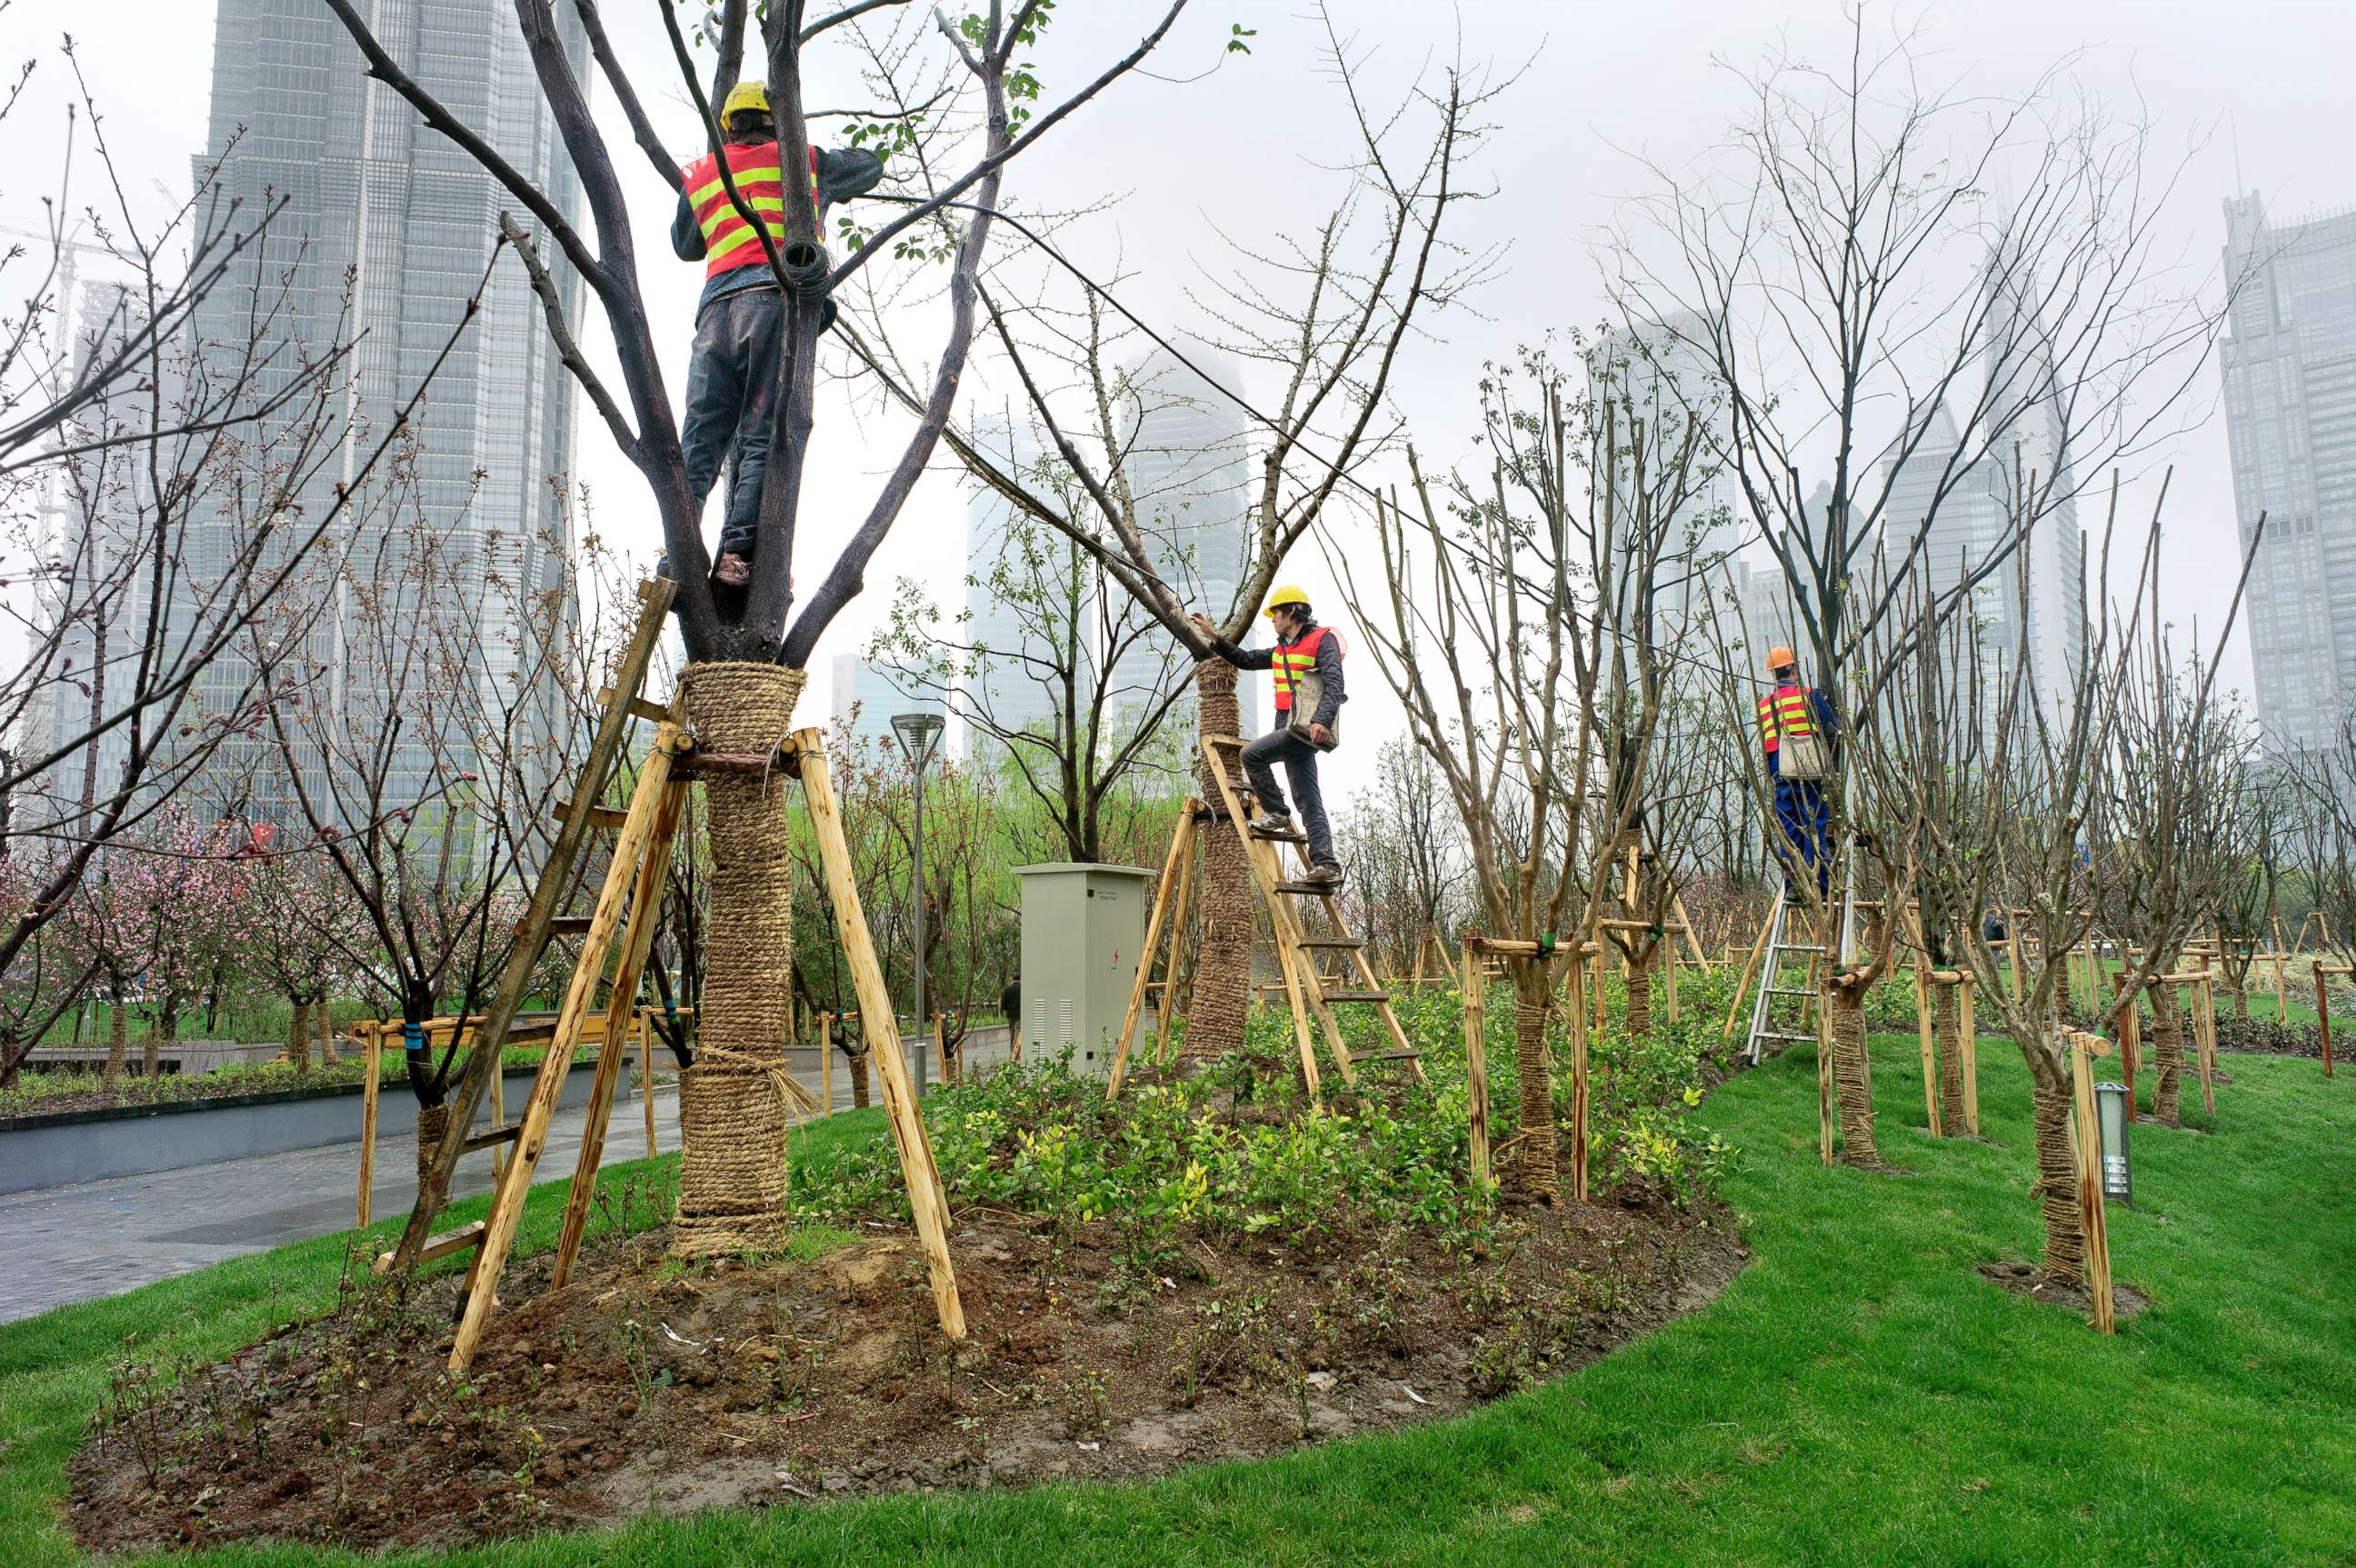 PHOTO: Workers plant trees in China in this stock photo.